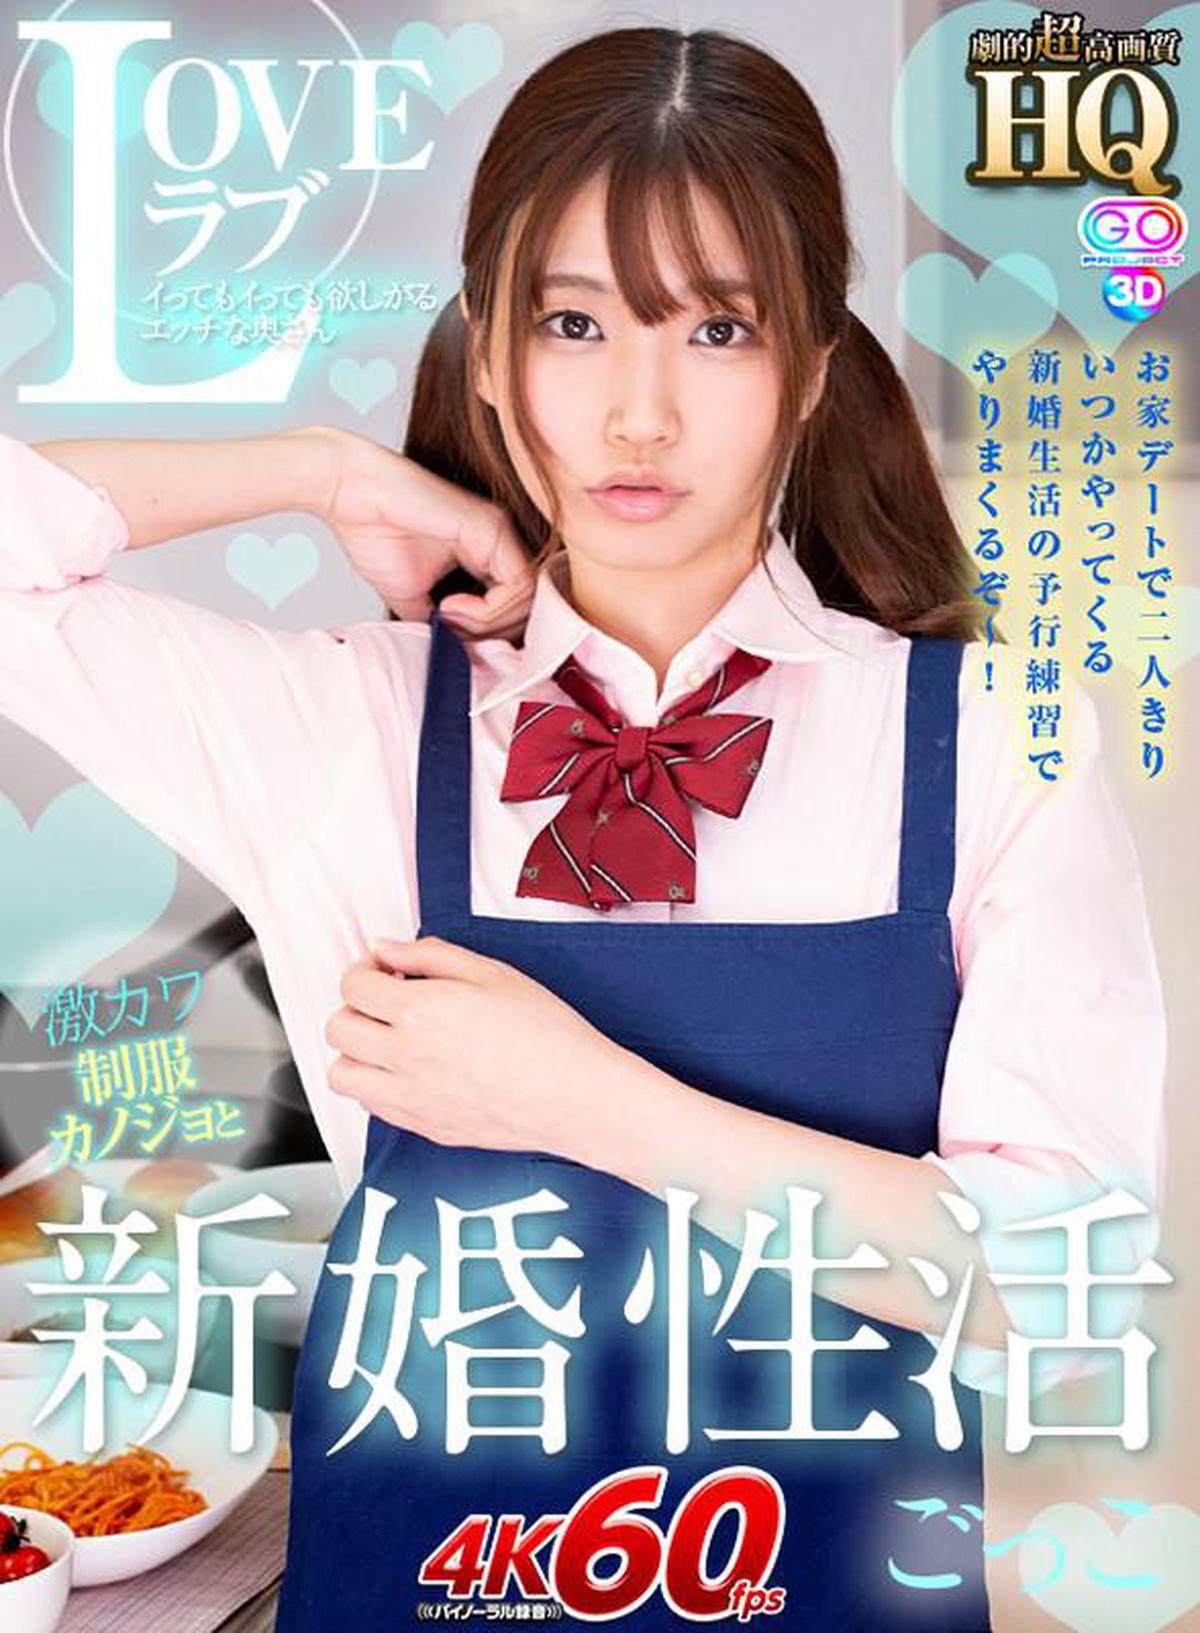 (VR) GOPJ-487 HQ Dramatic Super High Quality Geki Kawa Uniform Kanojo and LOVE Love Newlywed Sexual Activity A Naughty Wife Who Wants To Play